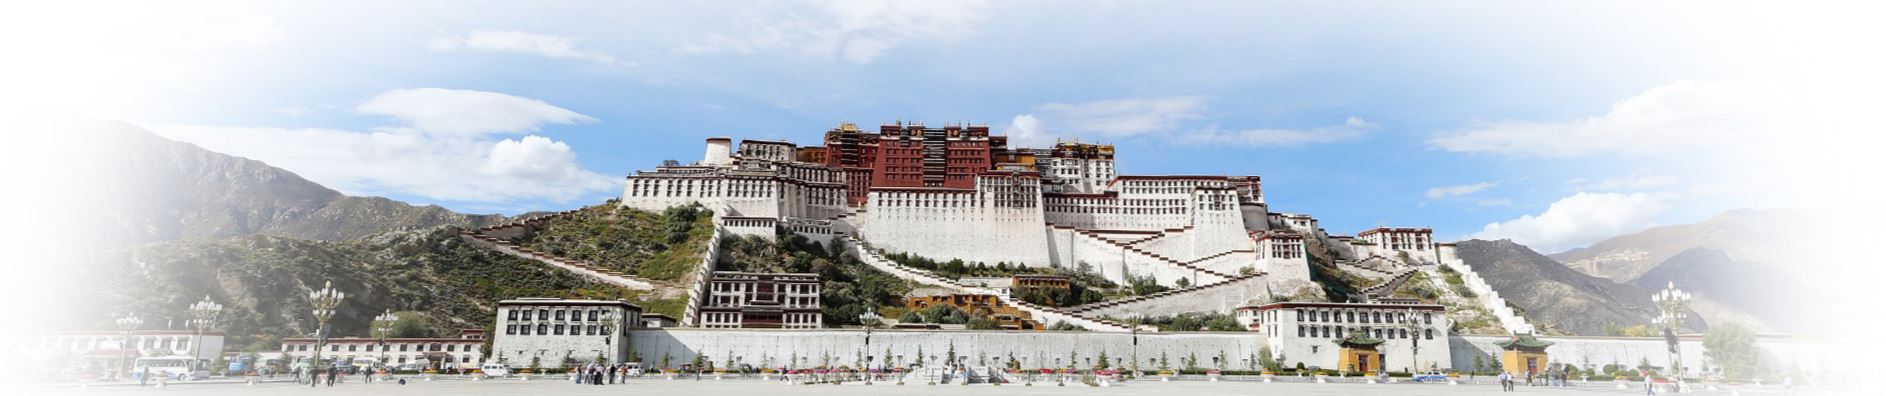 The Potala Palace, winter palace of the Dalai Lama since the 7th century, symbolizes Tibetan Buddhism and its central role in the traditional administration of Tibet